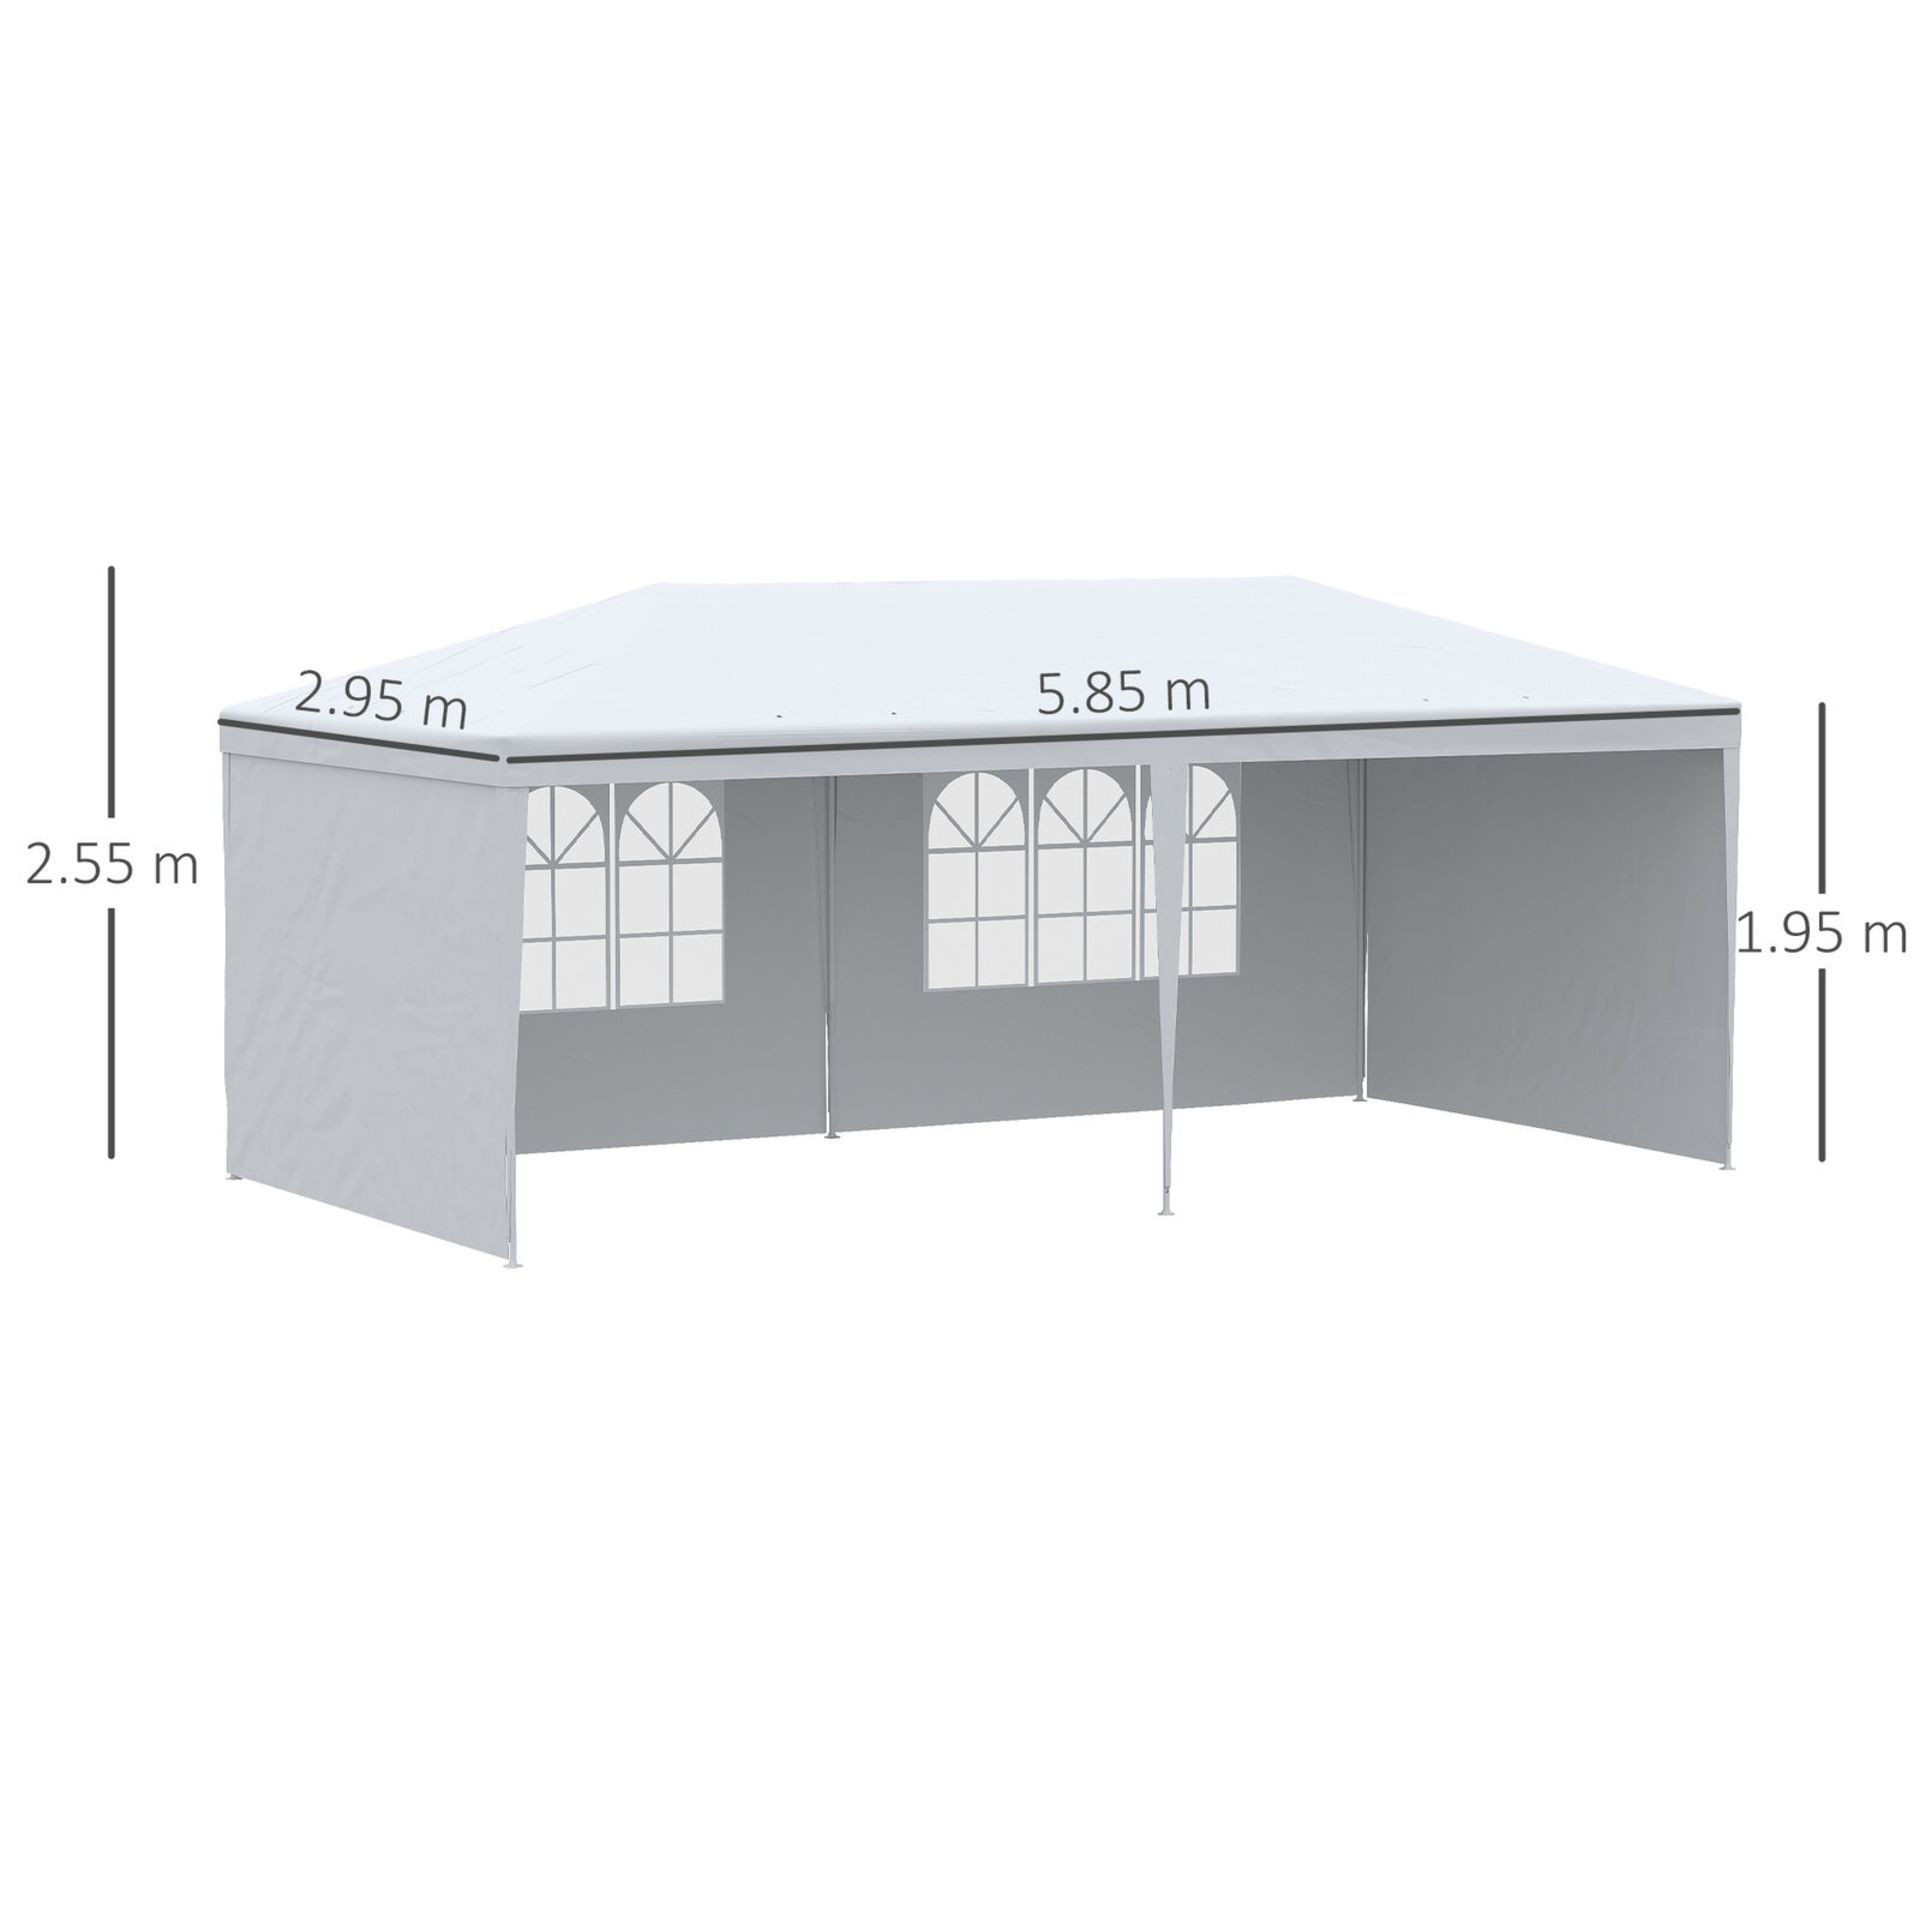 1 X TESCO OUTDOOR PARTY GAZEBO 3M X 6M IN ORIGINAL BOX - STOCK IMAGE FOR INDICATION OF SIZE ONLY - Image 3 of 5